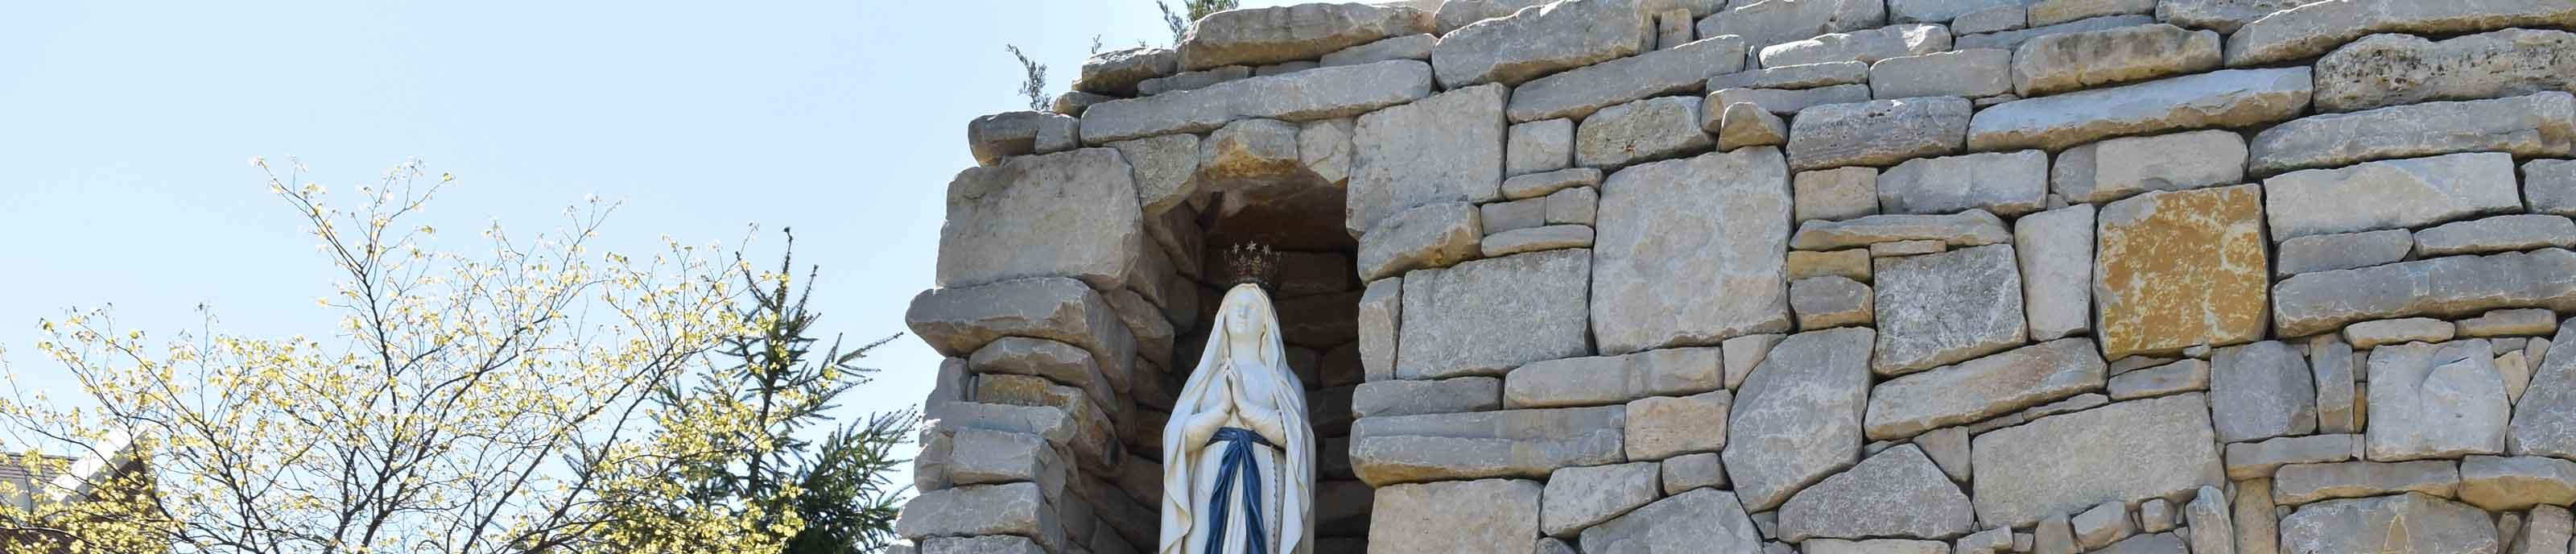 The statue of the Blessed Mother in Mary's Grotto